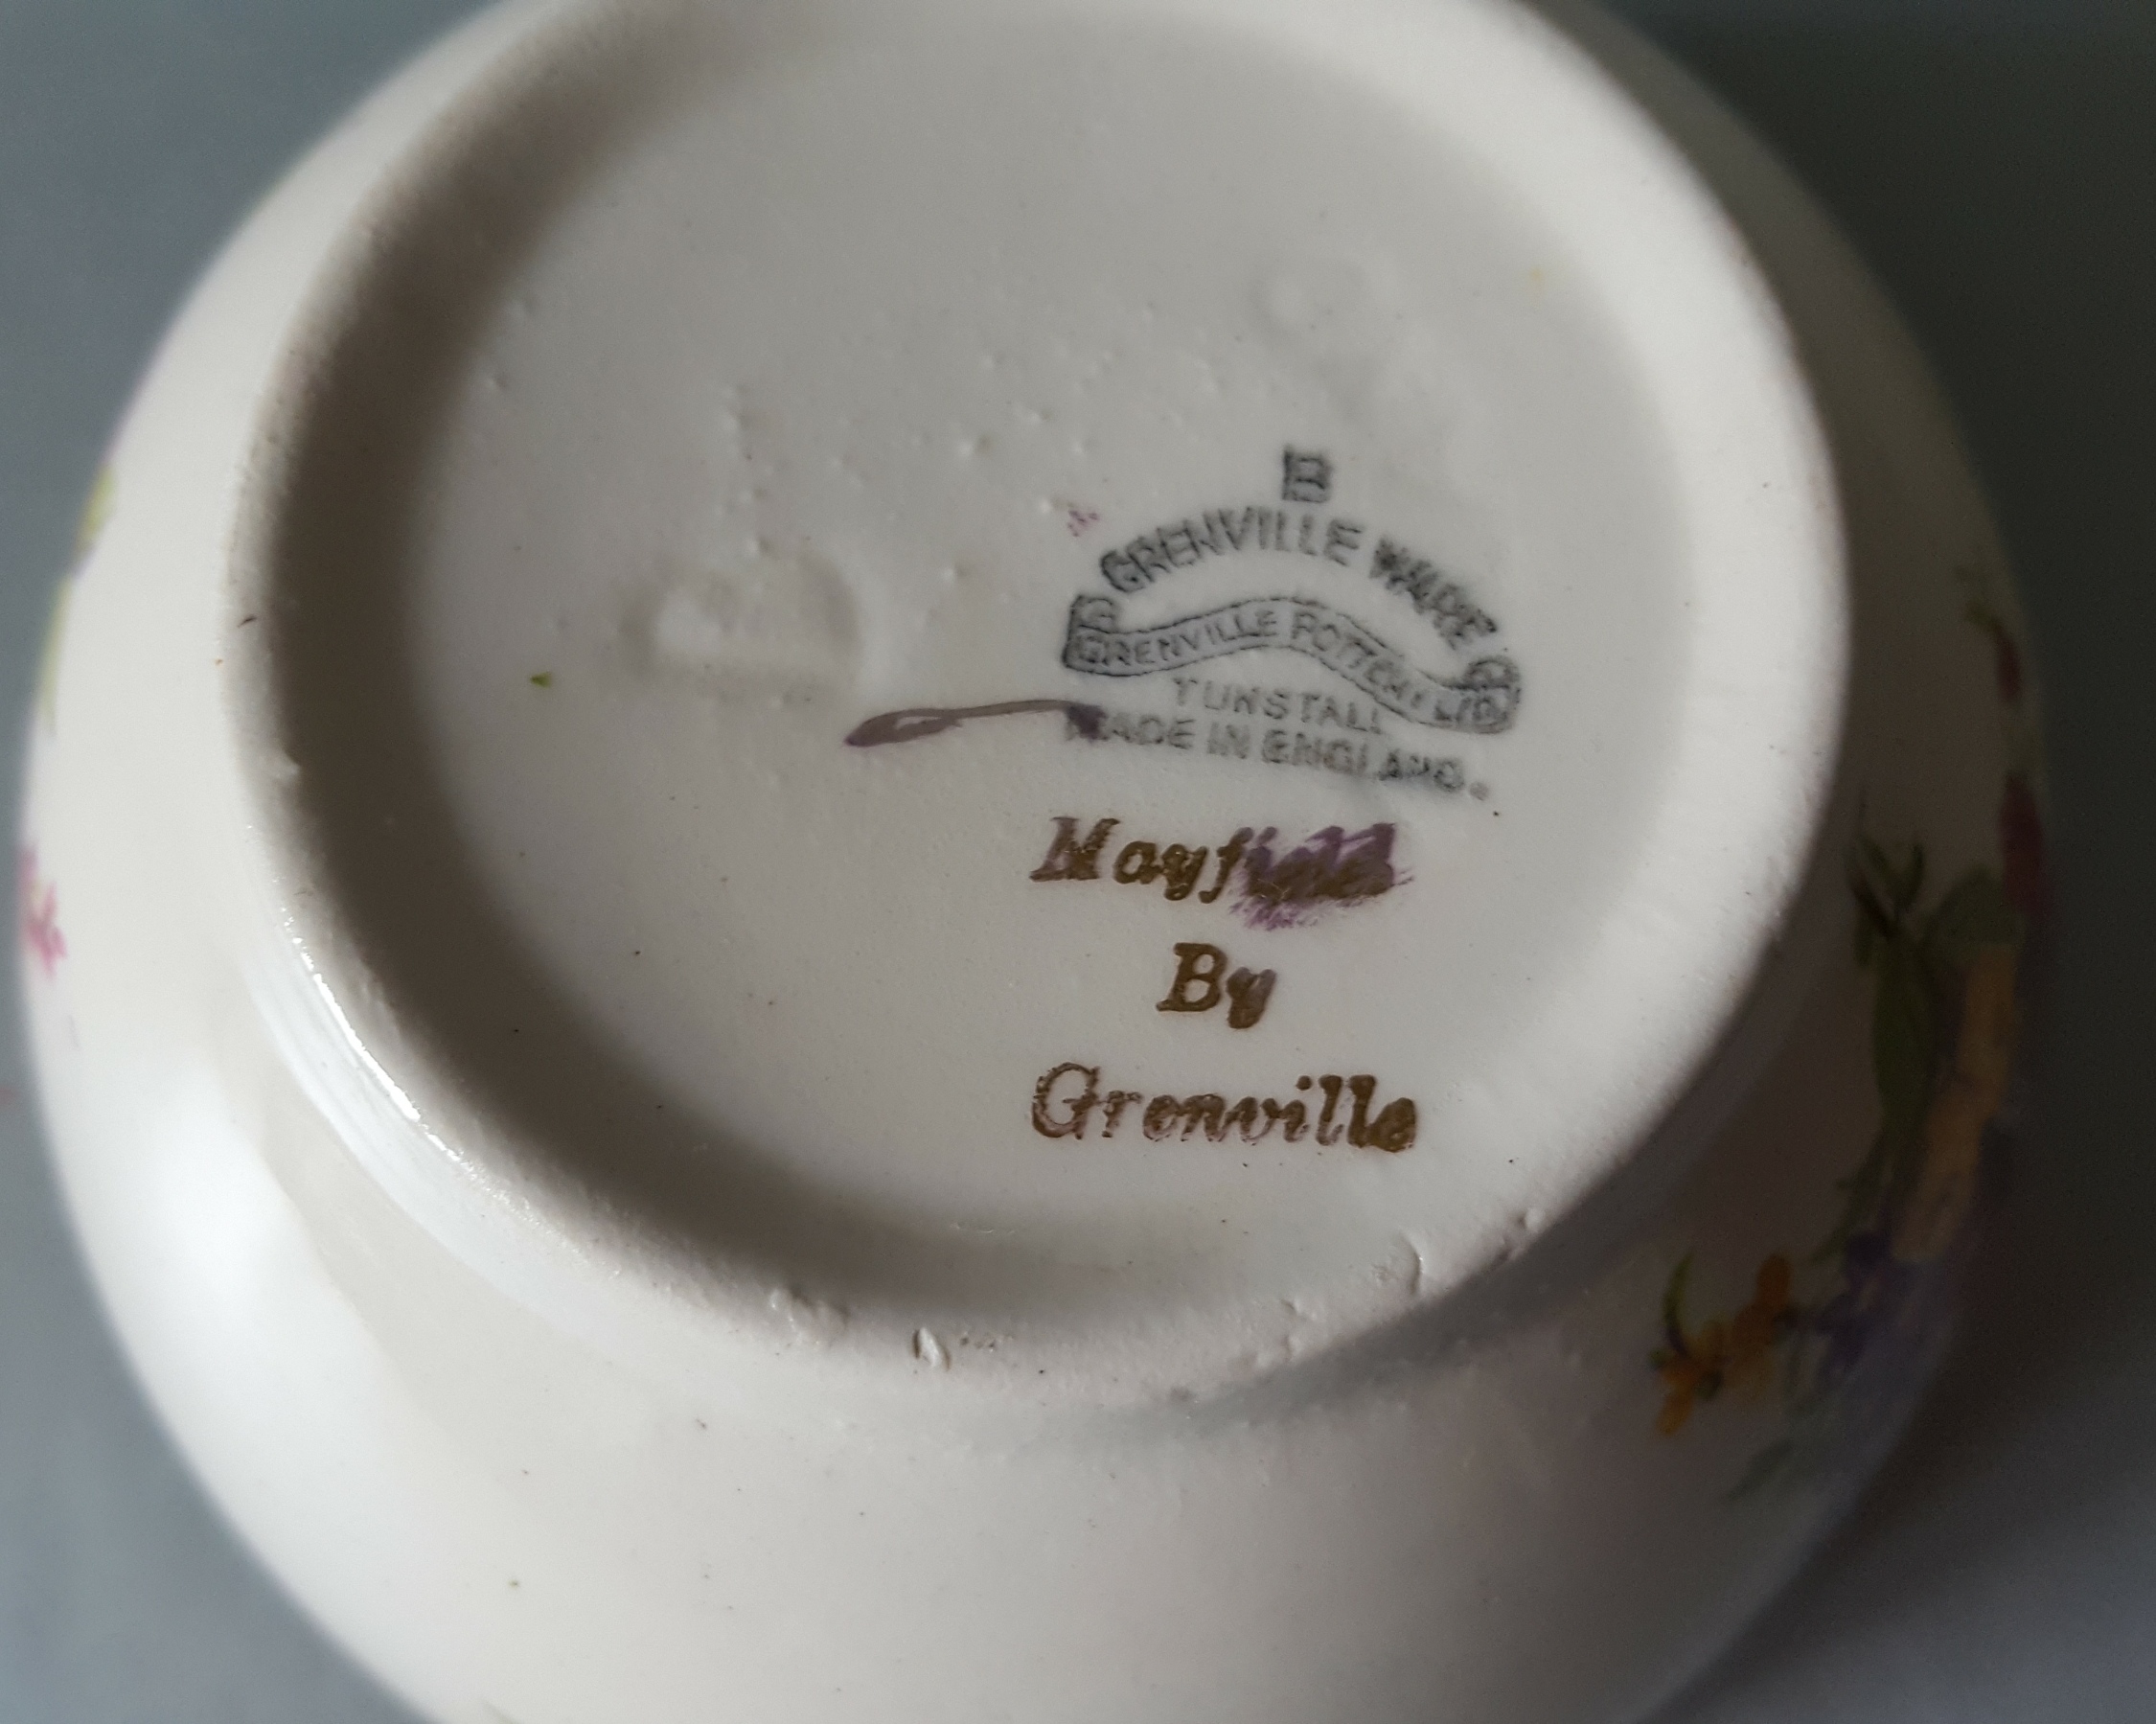 Vintage Retro Box of Grenville Ware China & Pottery Tea Service NO RESERVE - Image 2 of 2